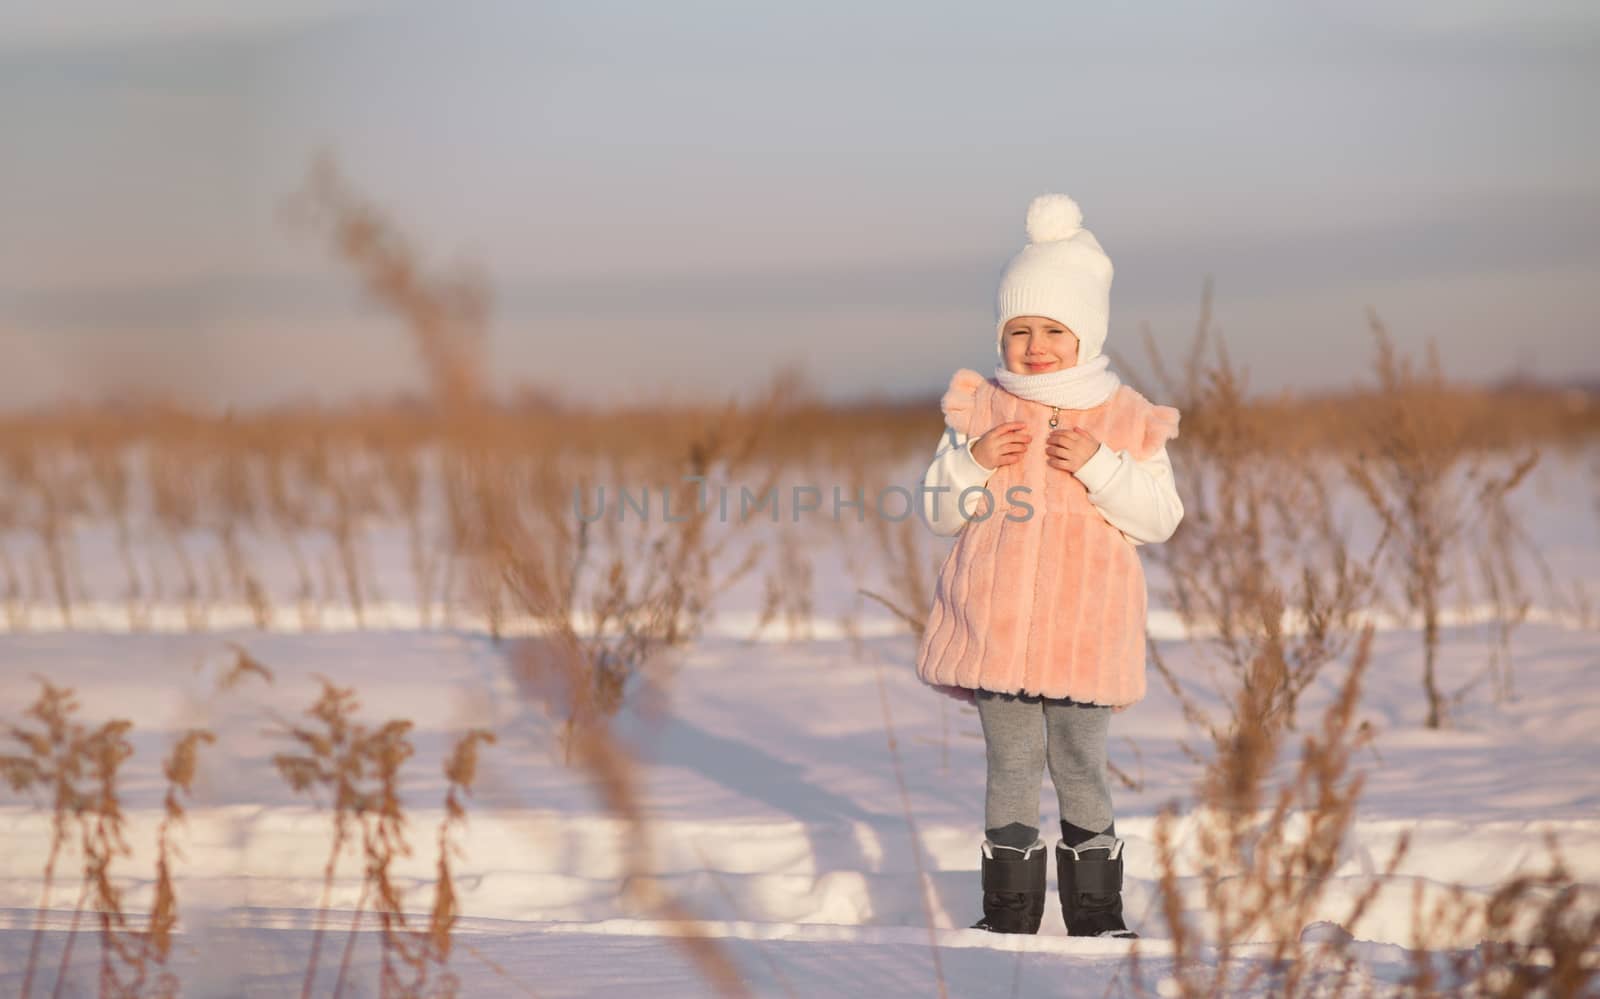 A little girl stands in the middle of a field in winter at sunset in the rays of the setting sun